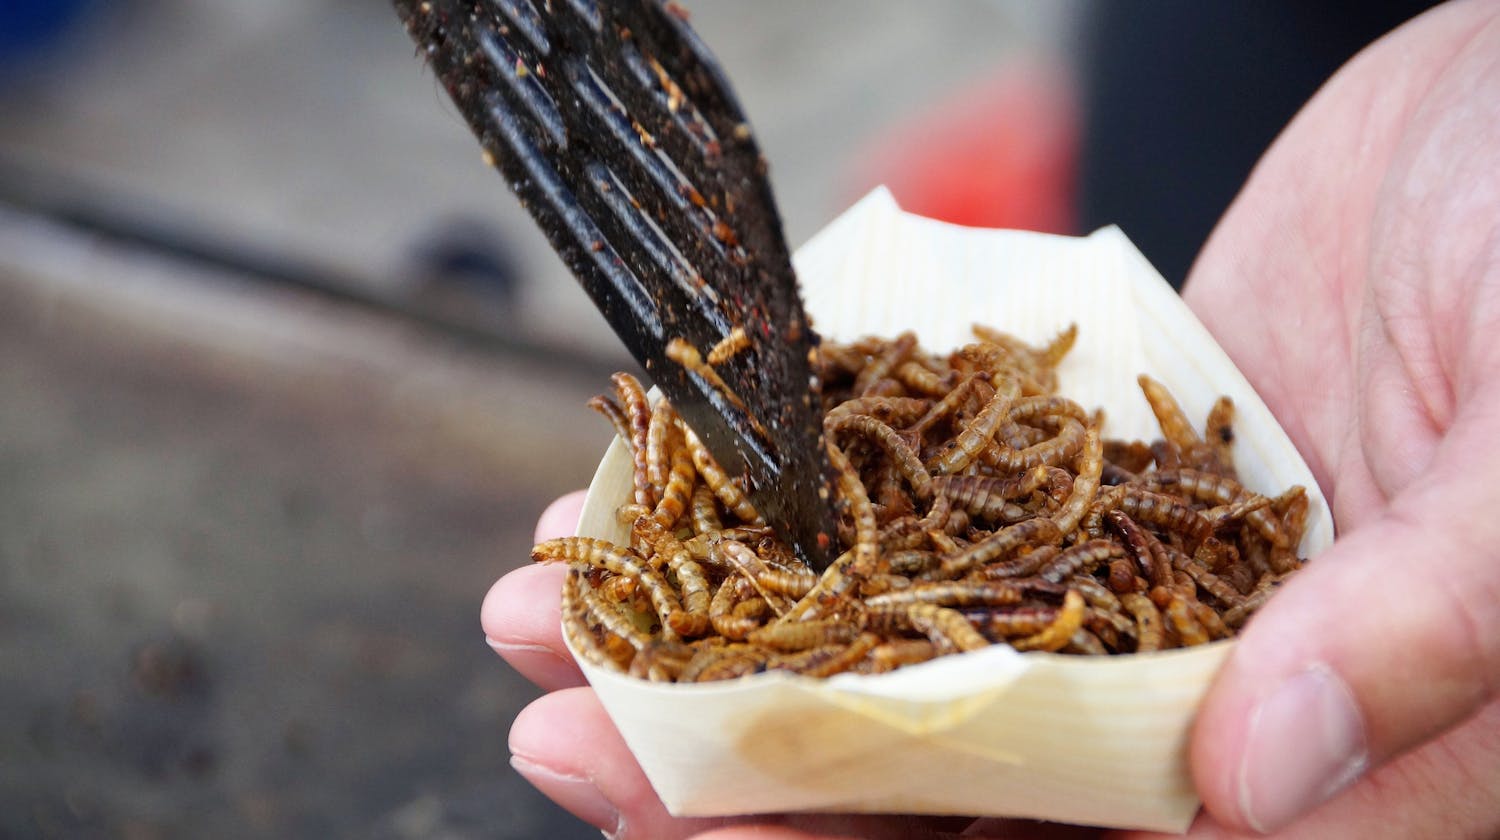 Fried mealworms served as a snack